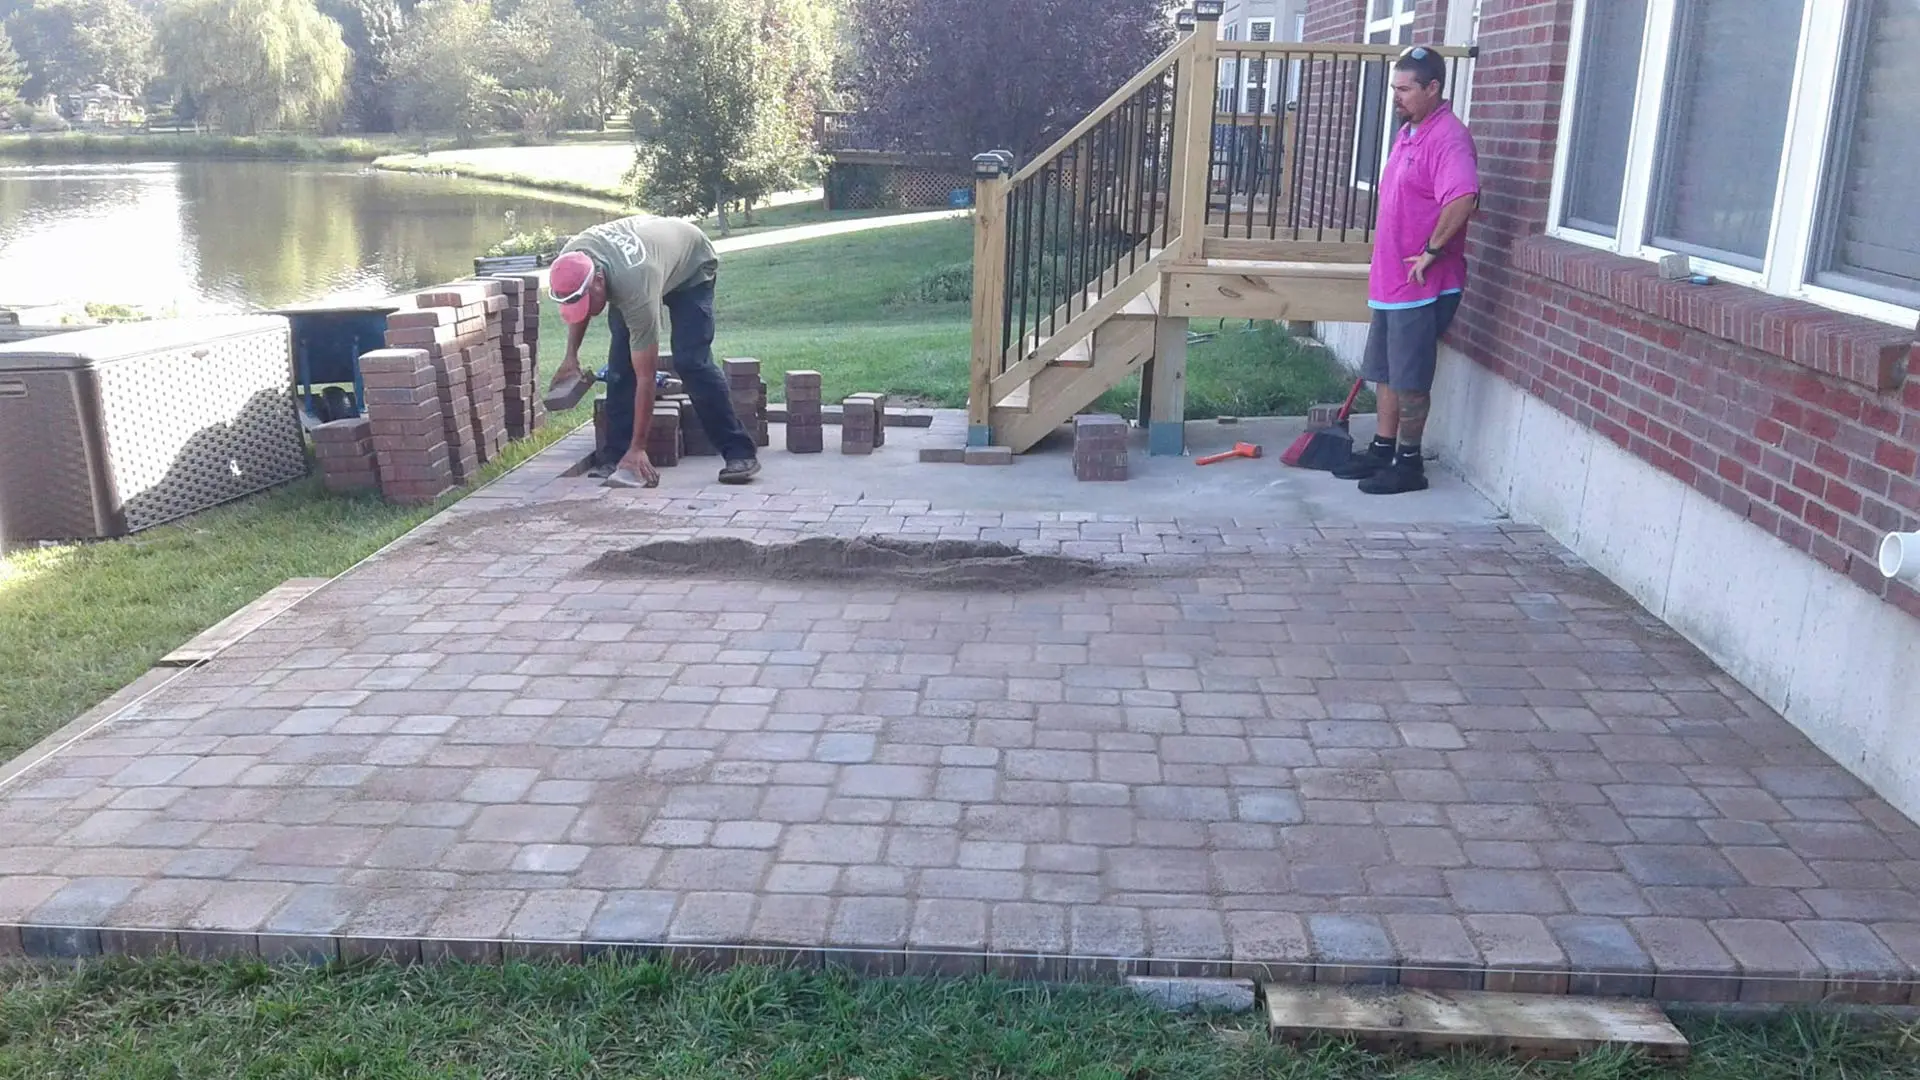 Degree professional installing a patio hardscape in Mason, OH.